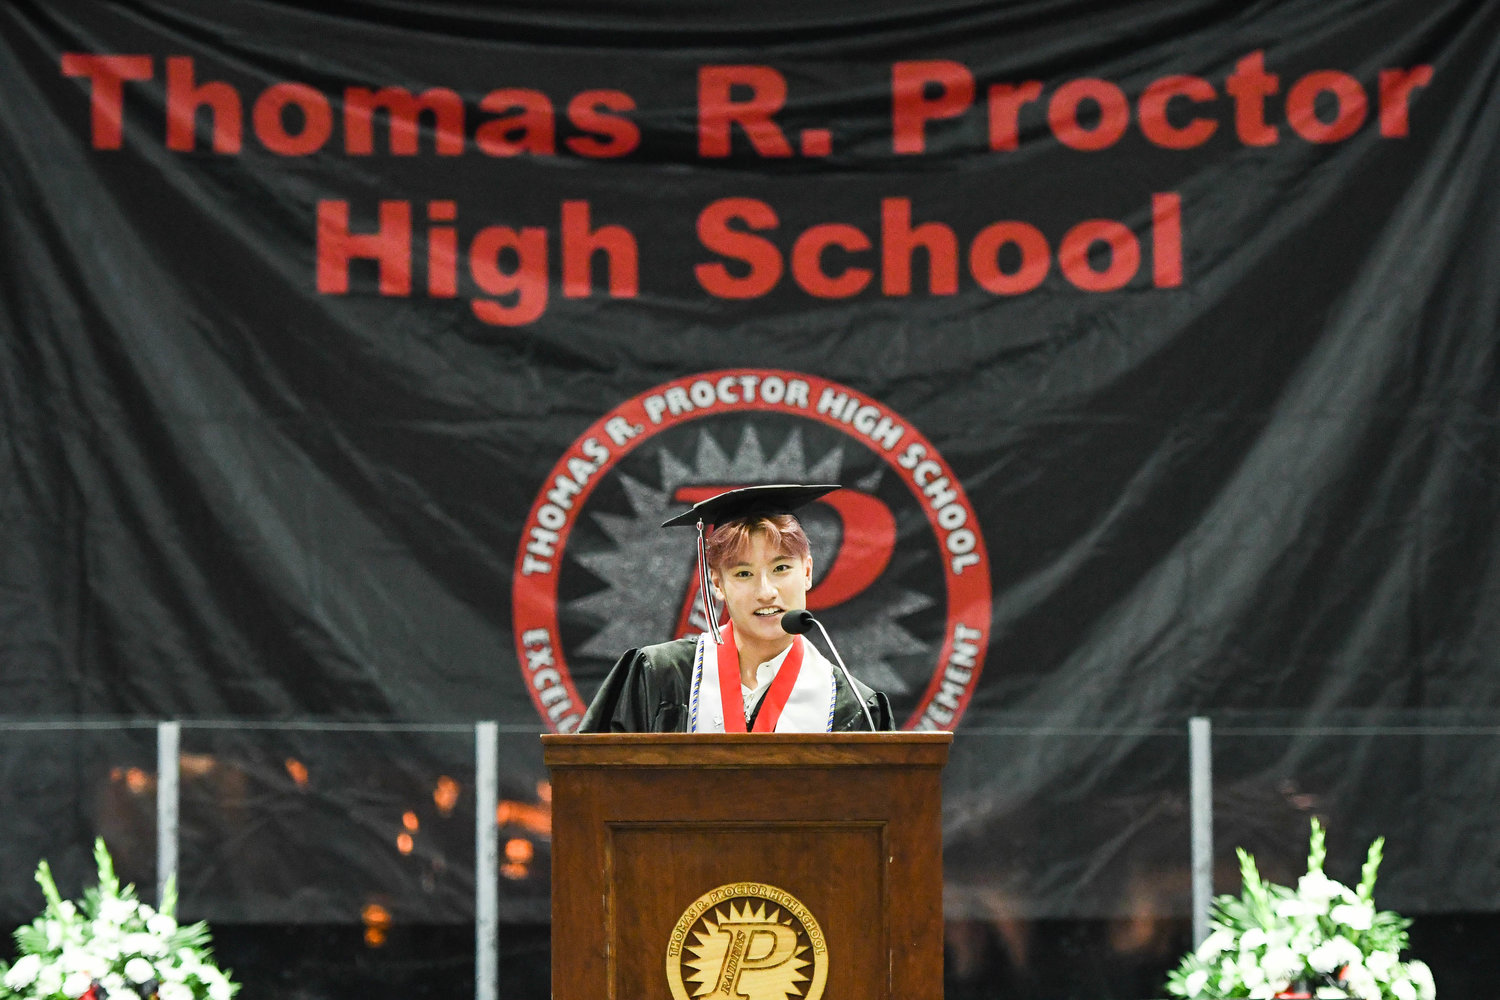 Valedictorian John Nguyen speaks during the annual commencement ceremony for Thomas R. Proctor High School on Friday at the Adirondack Bank Center at the Utica Memorial Auditorium.